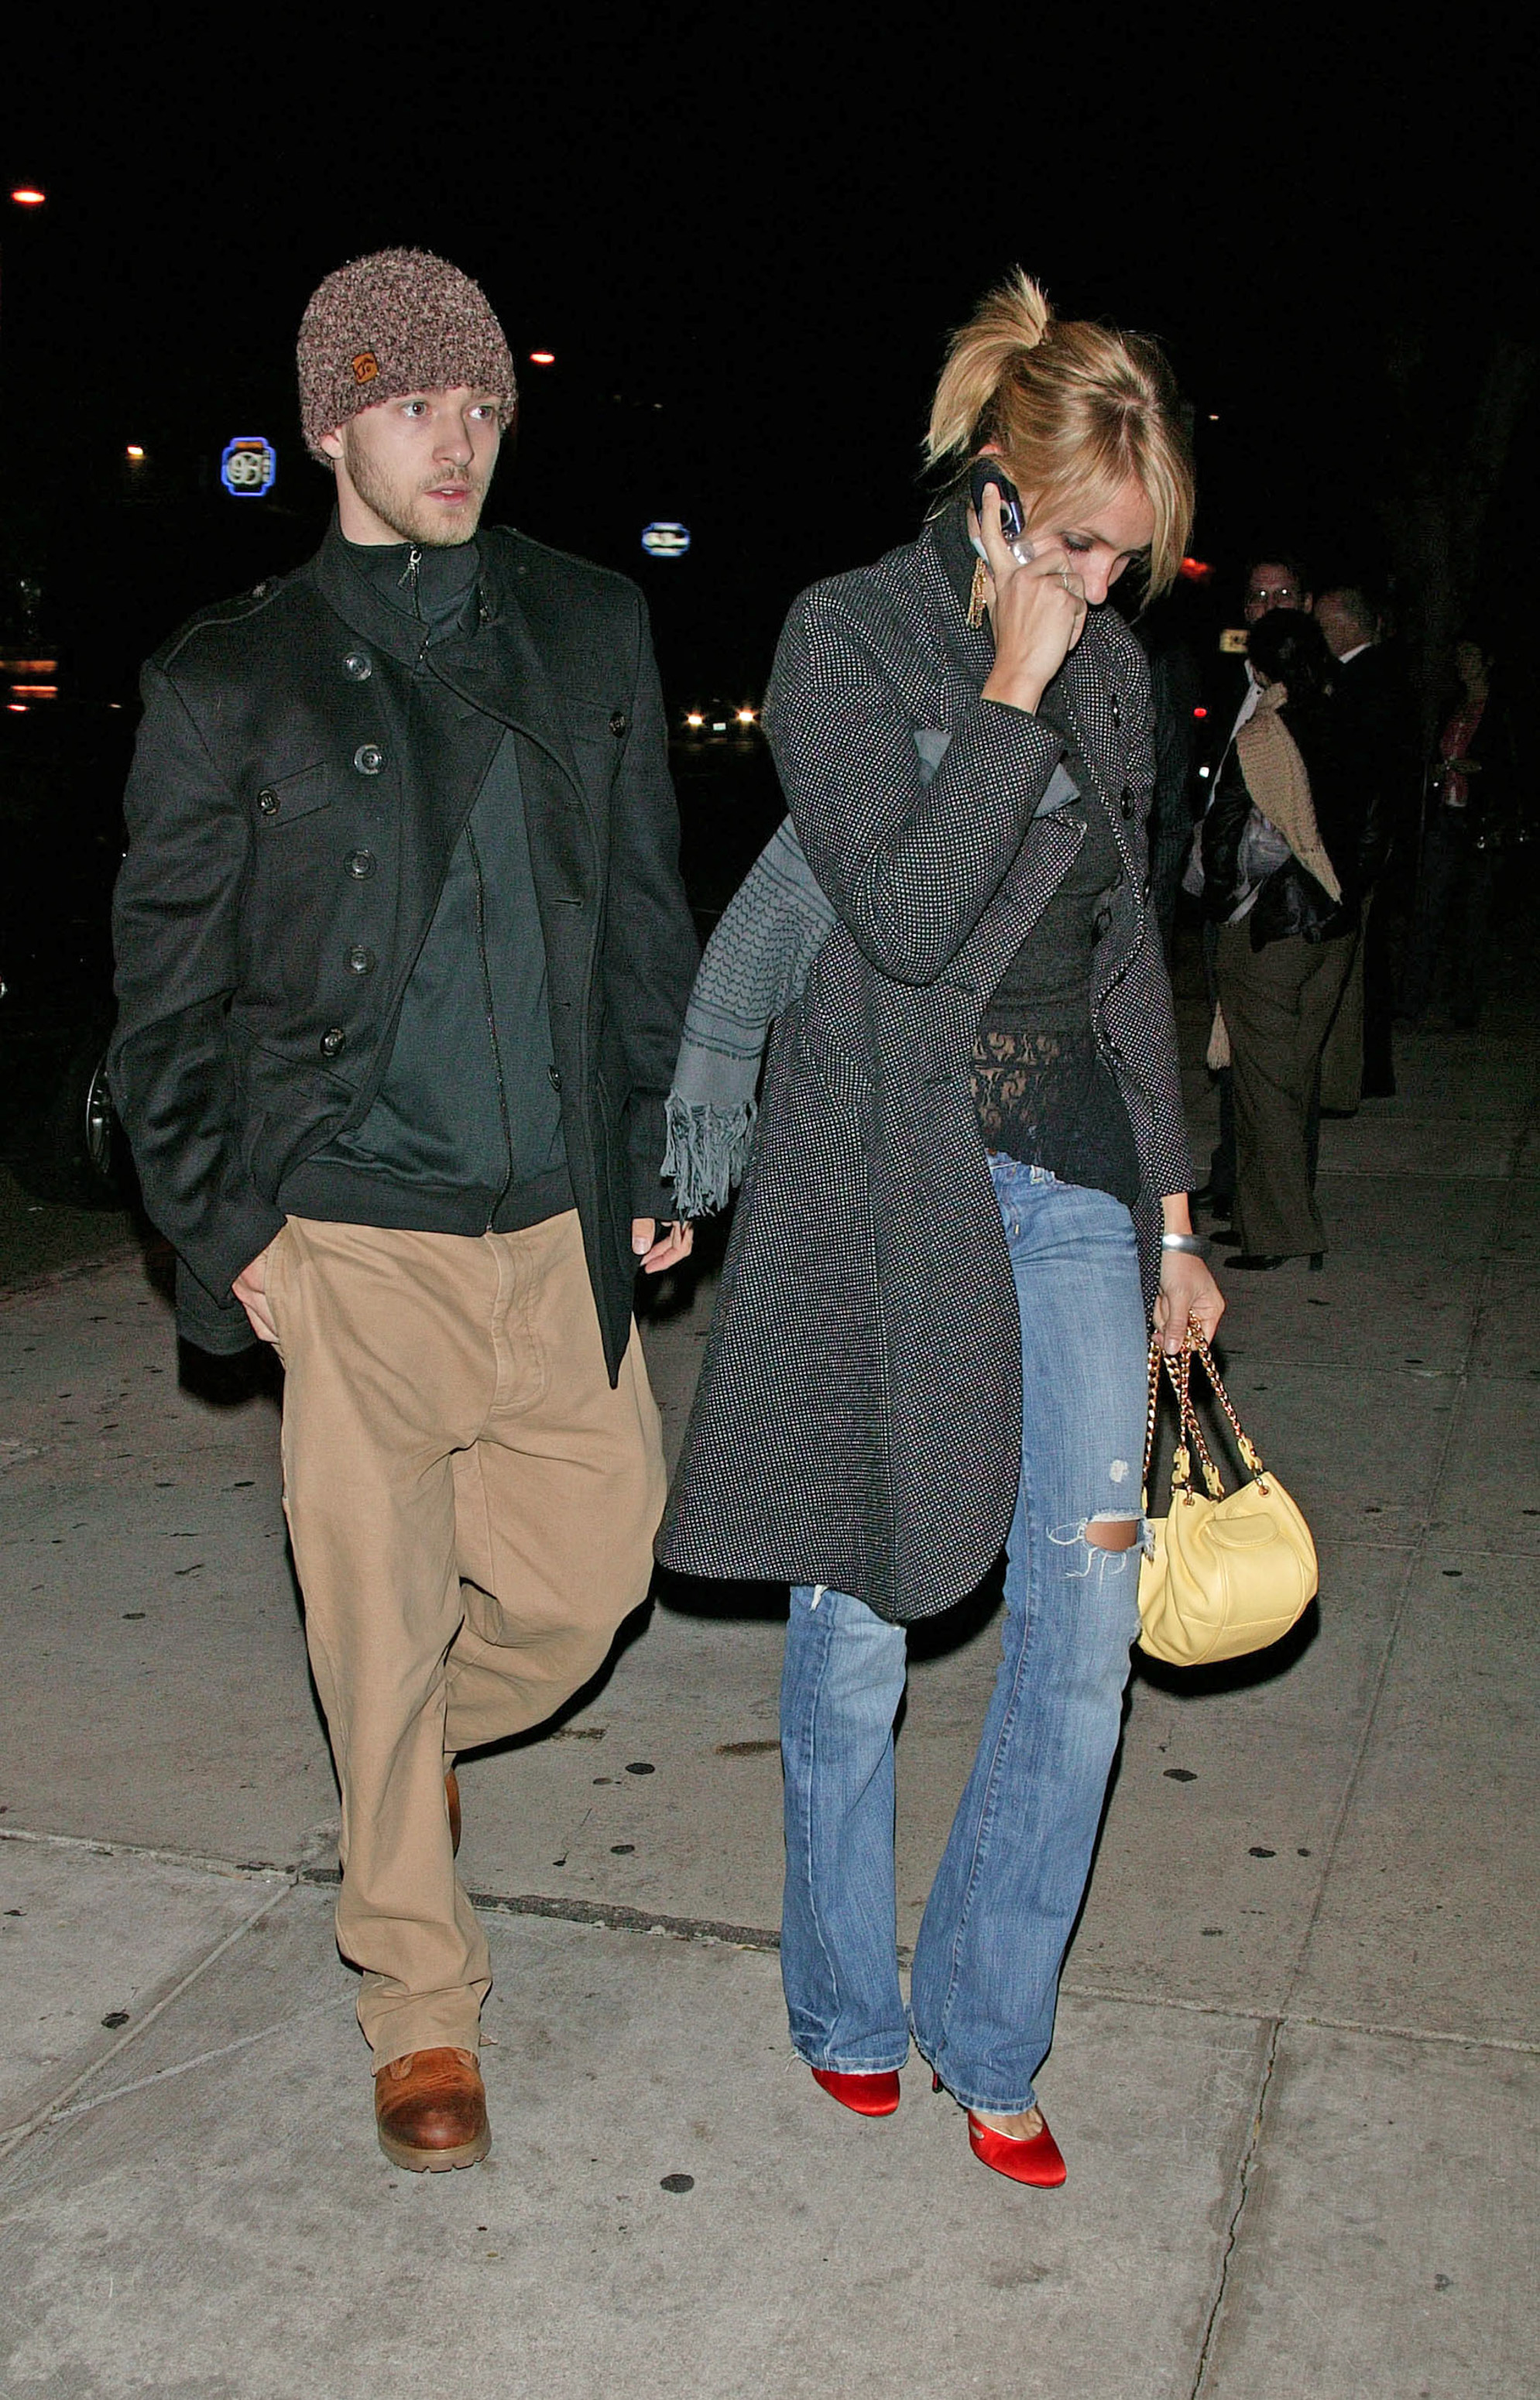 Justin Timberlake and Cameron Diaz spotted in Los Angeles, California on November 30, 2004 | Source: Getty Images